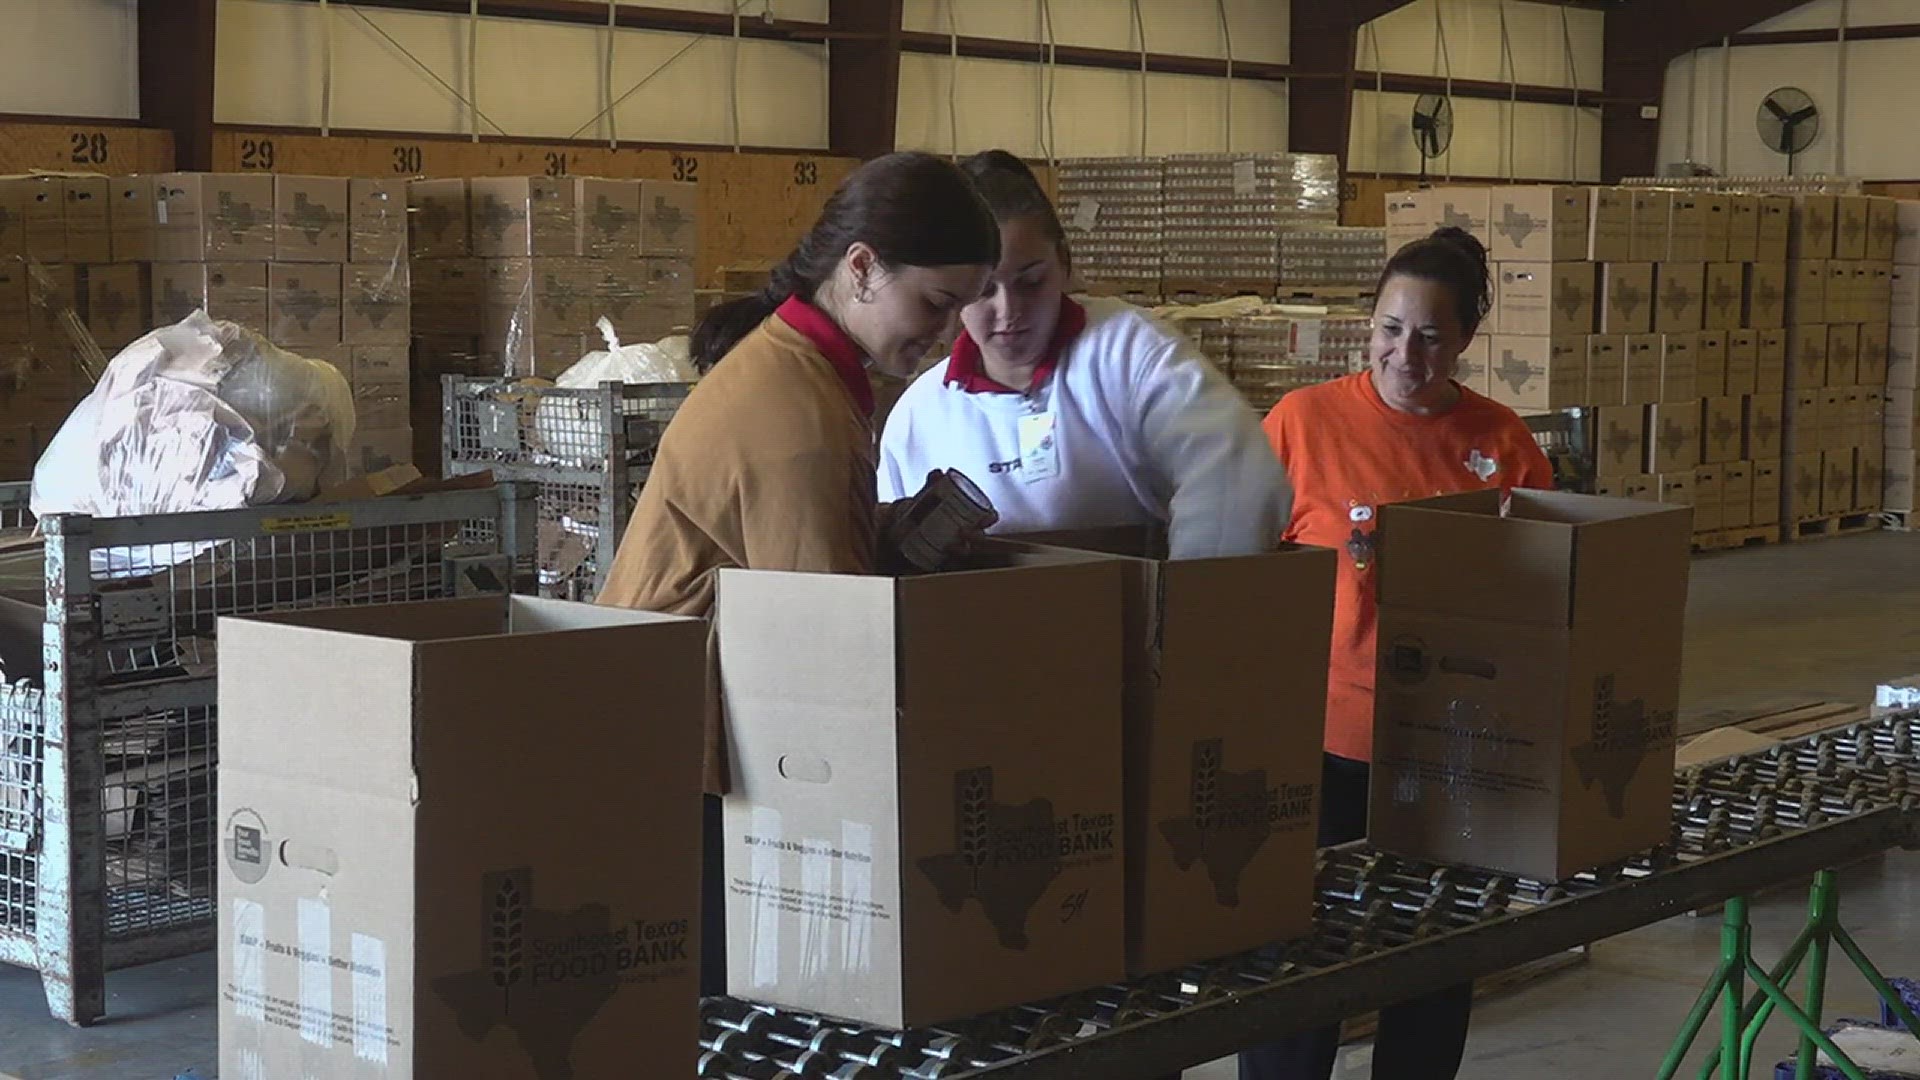 300 to 400 volunteers are needed to help package more than 2 million pounds of food that will go to people in need this holiday season.